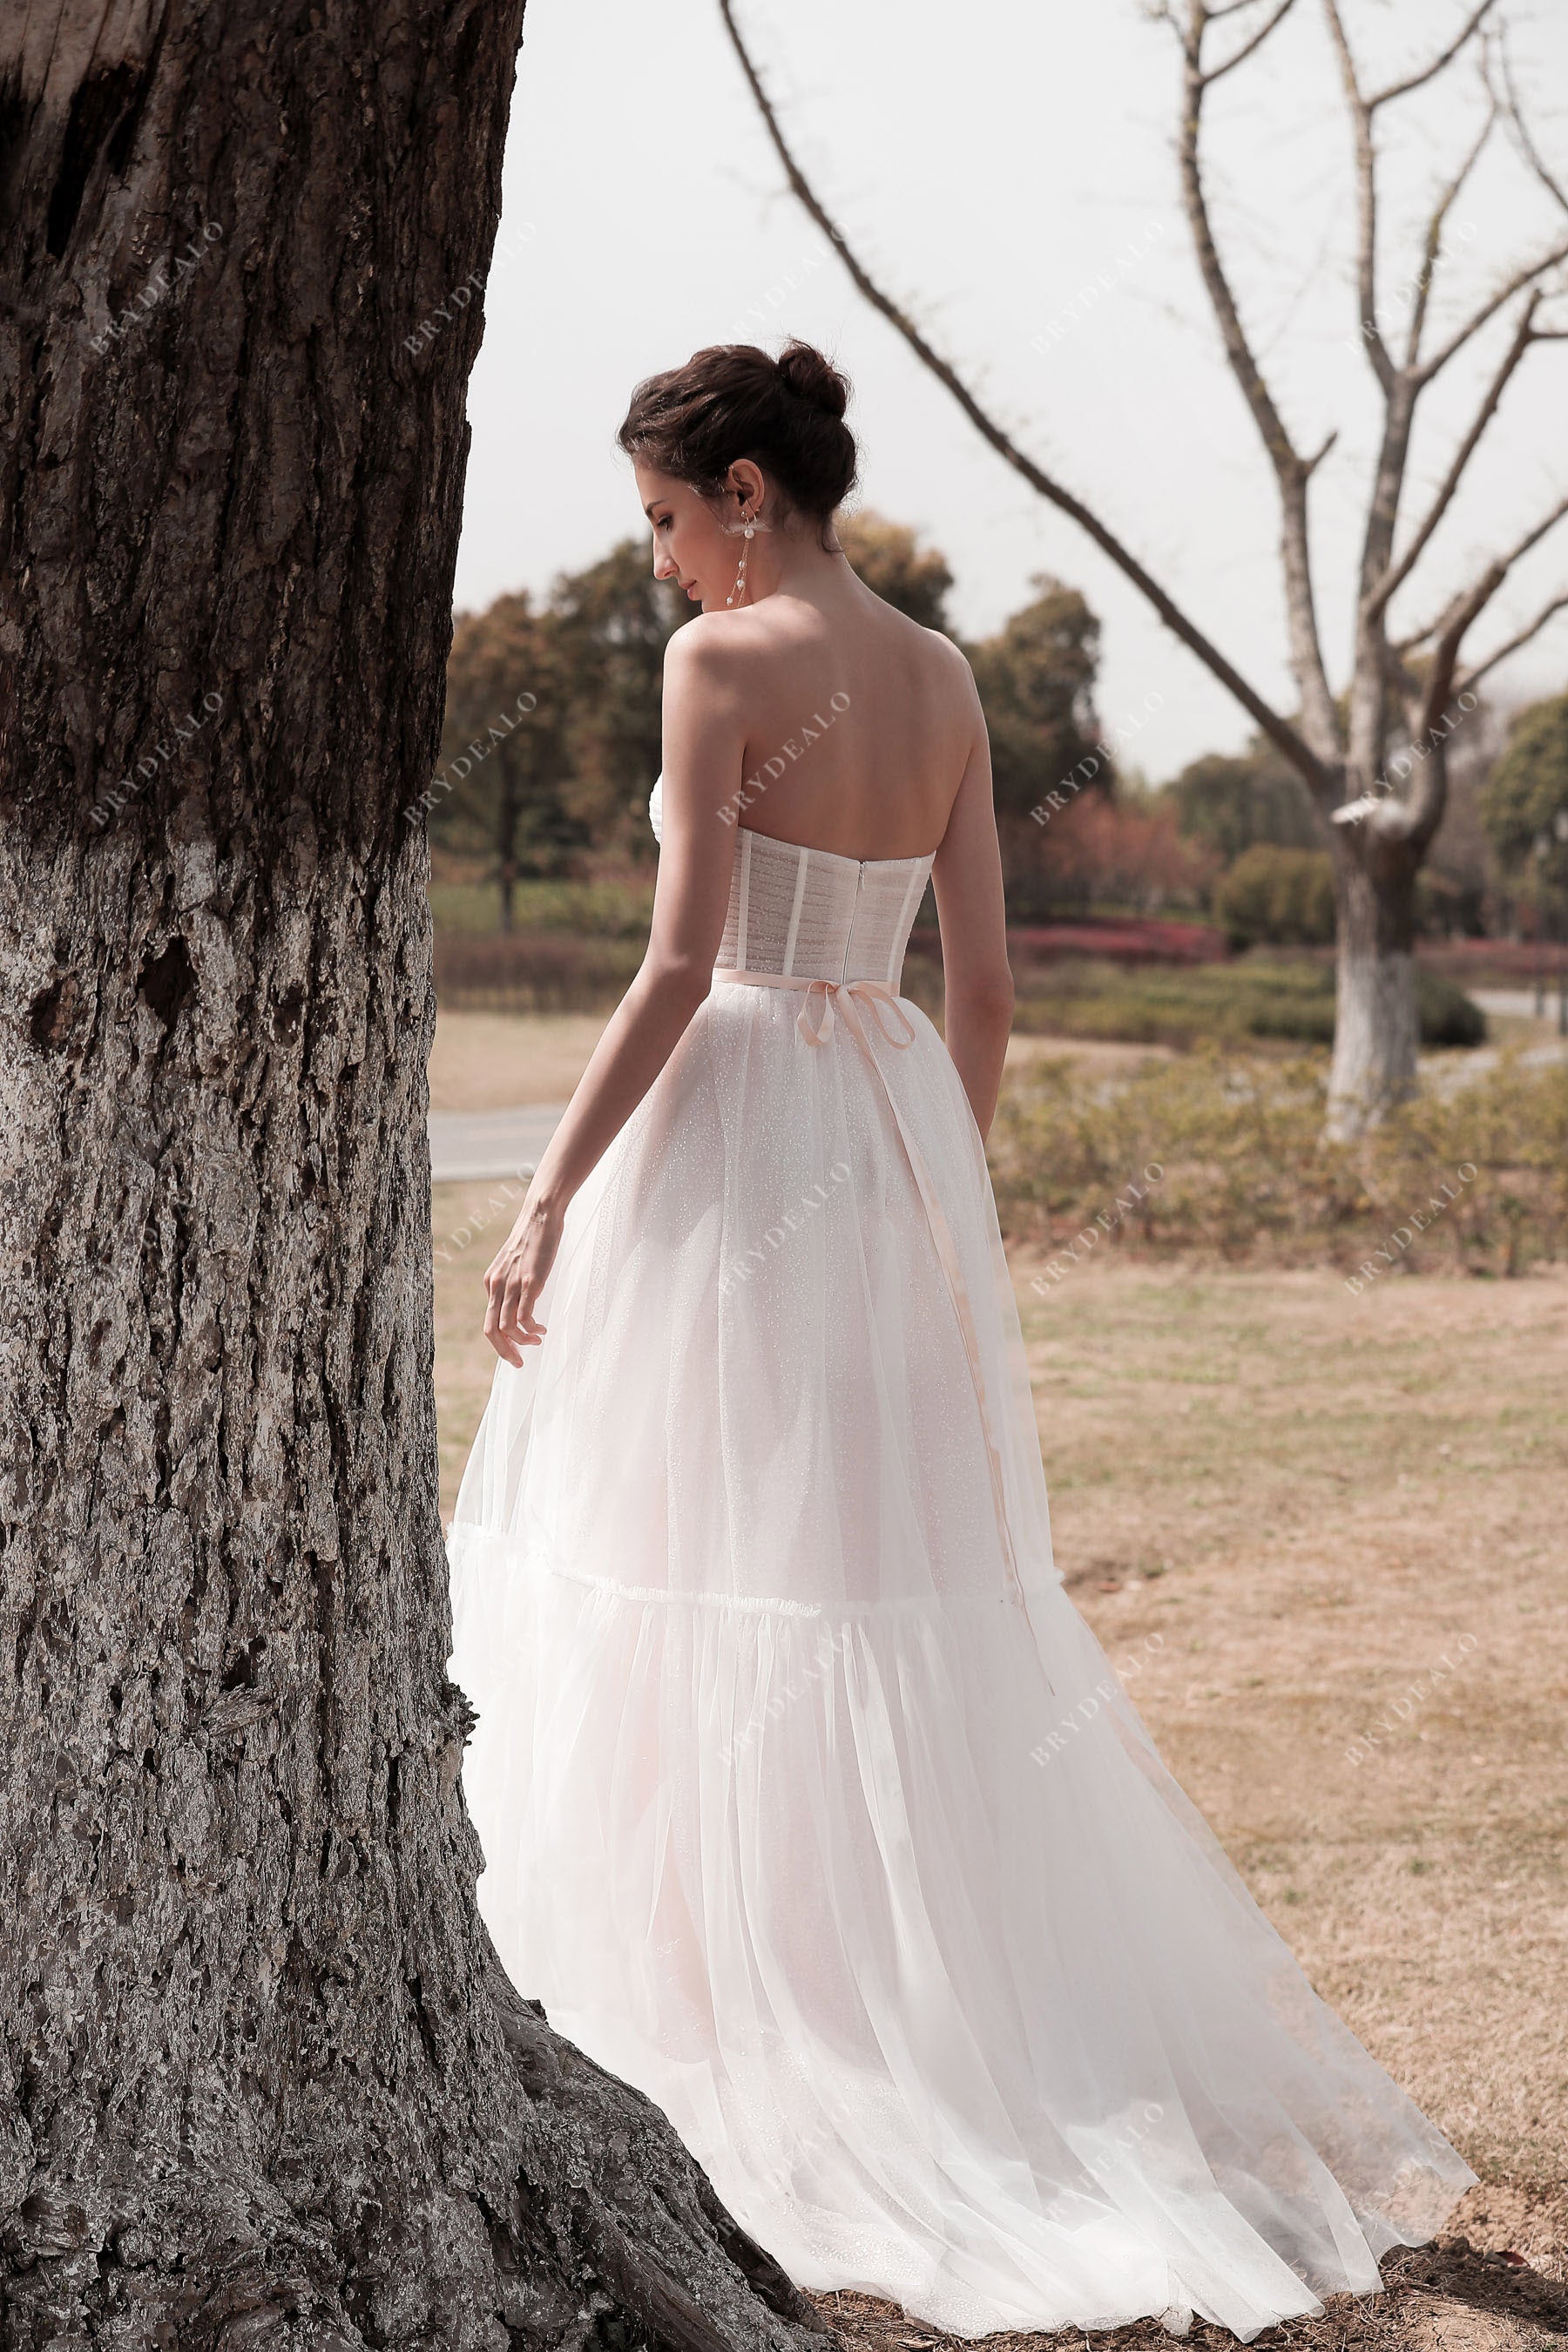 Beach Wedding Dresses & Bridal Gowns | hitched.co.uk